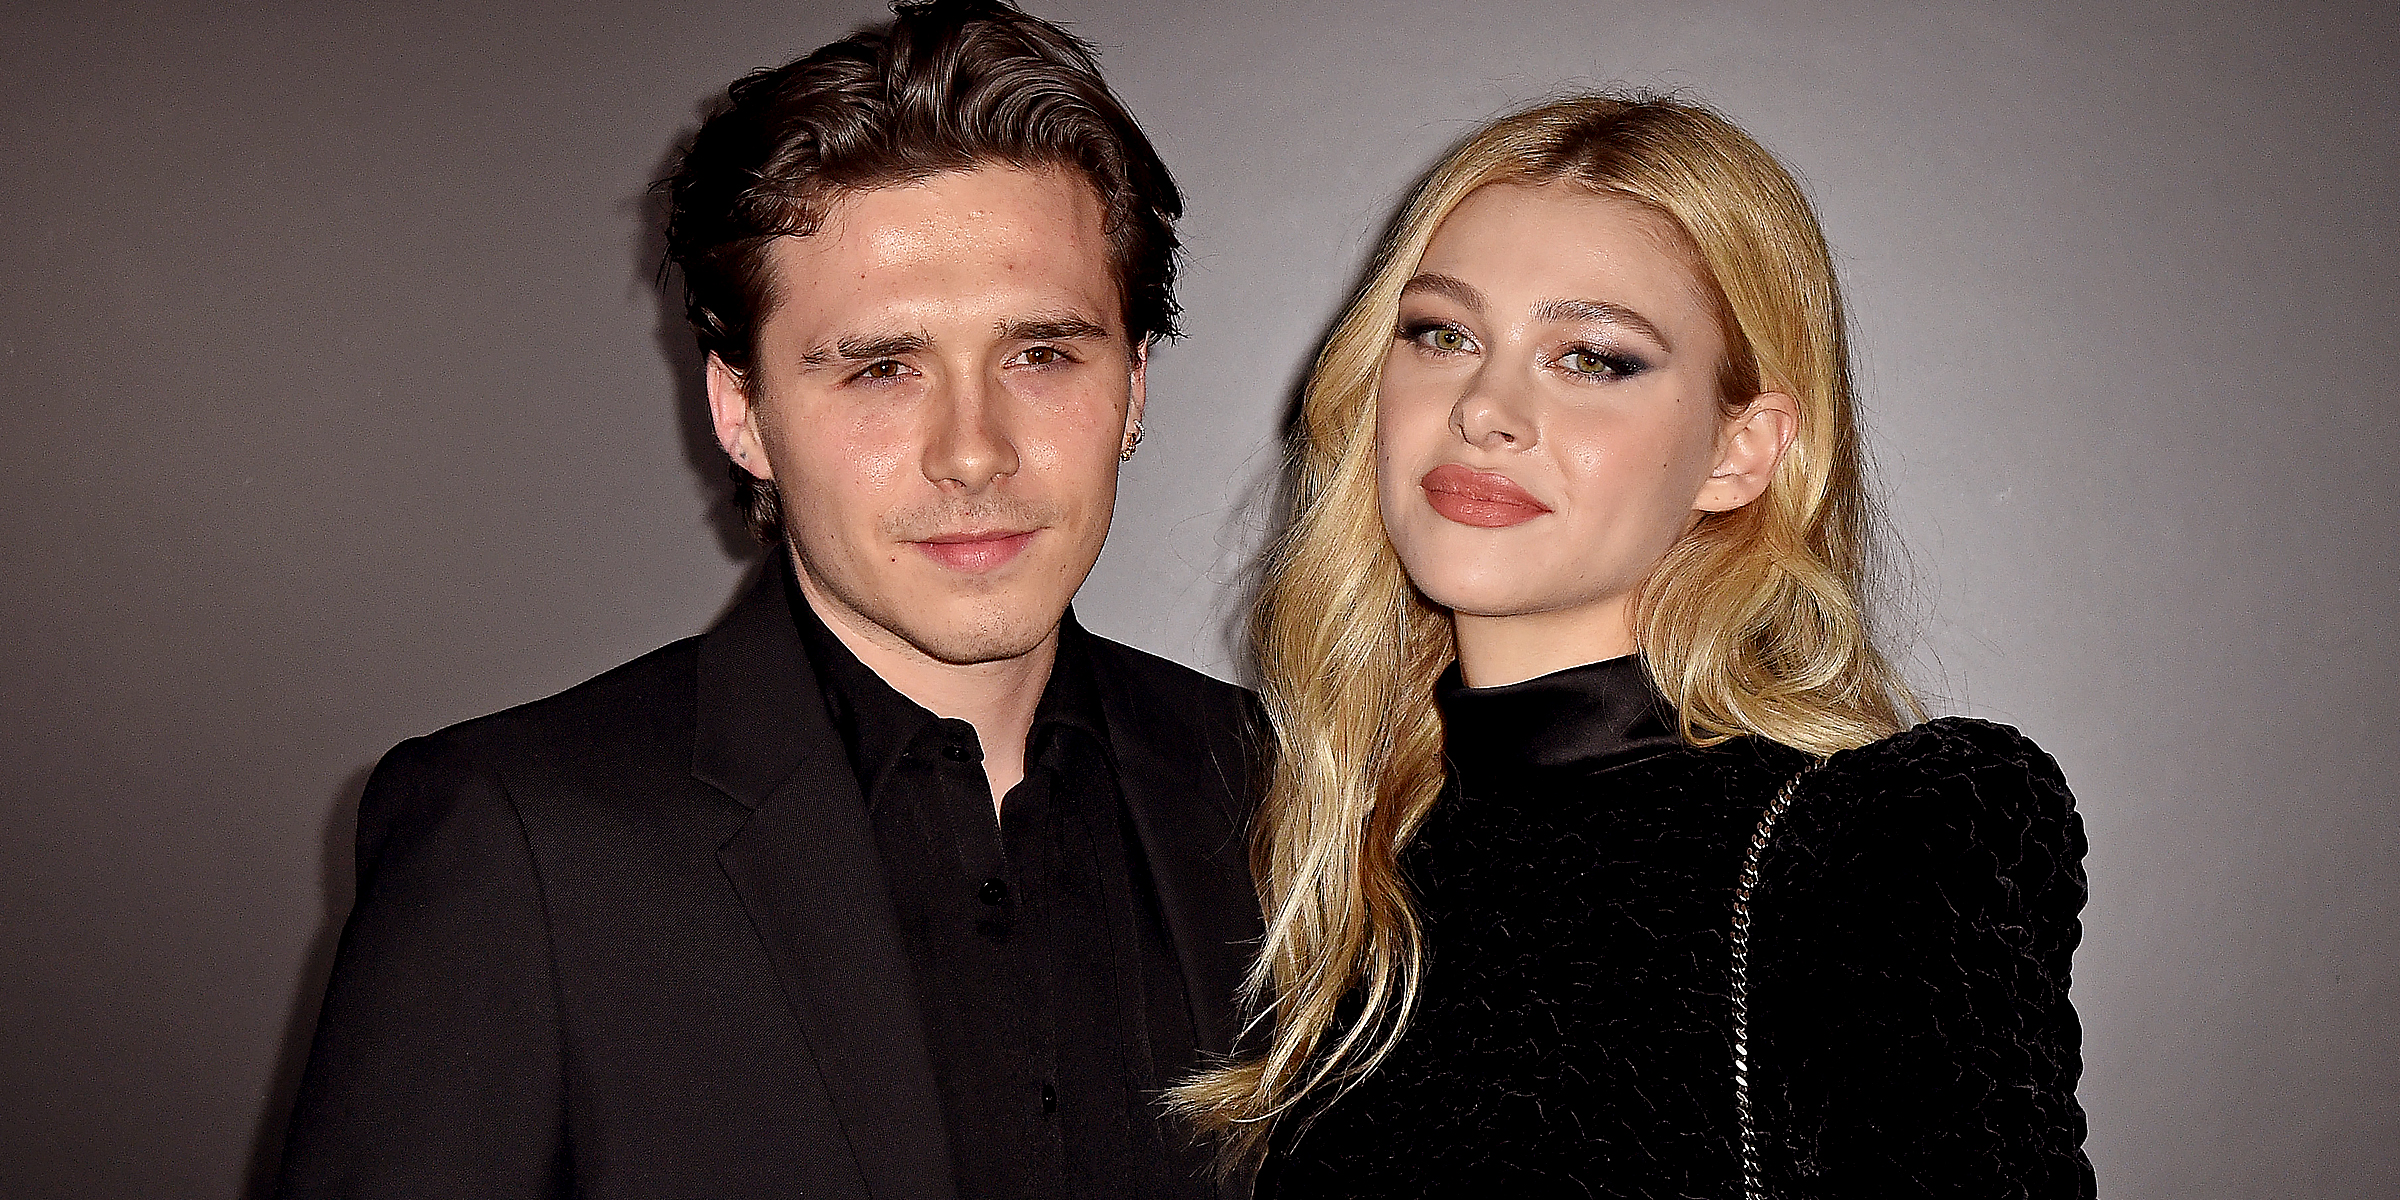 Brooklyn Beckham and Nicola Peltz | Source: Getty Images